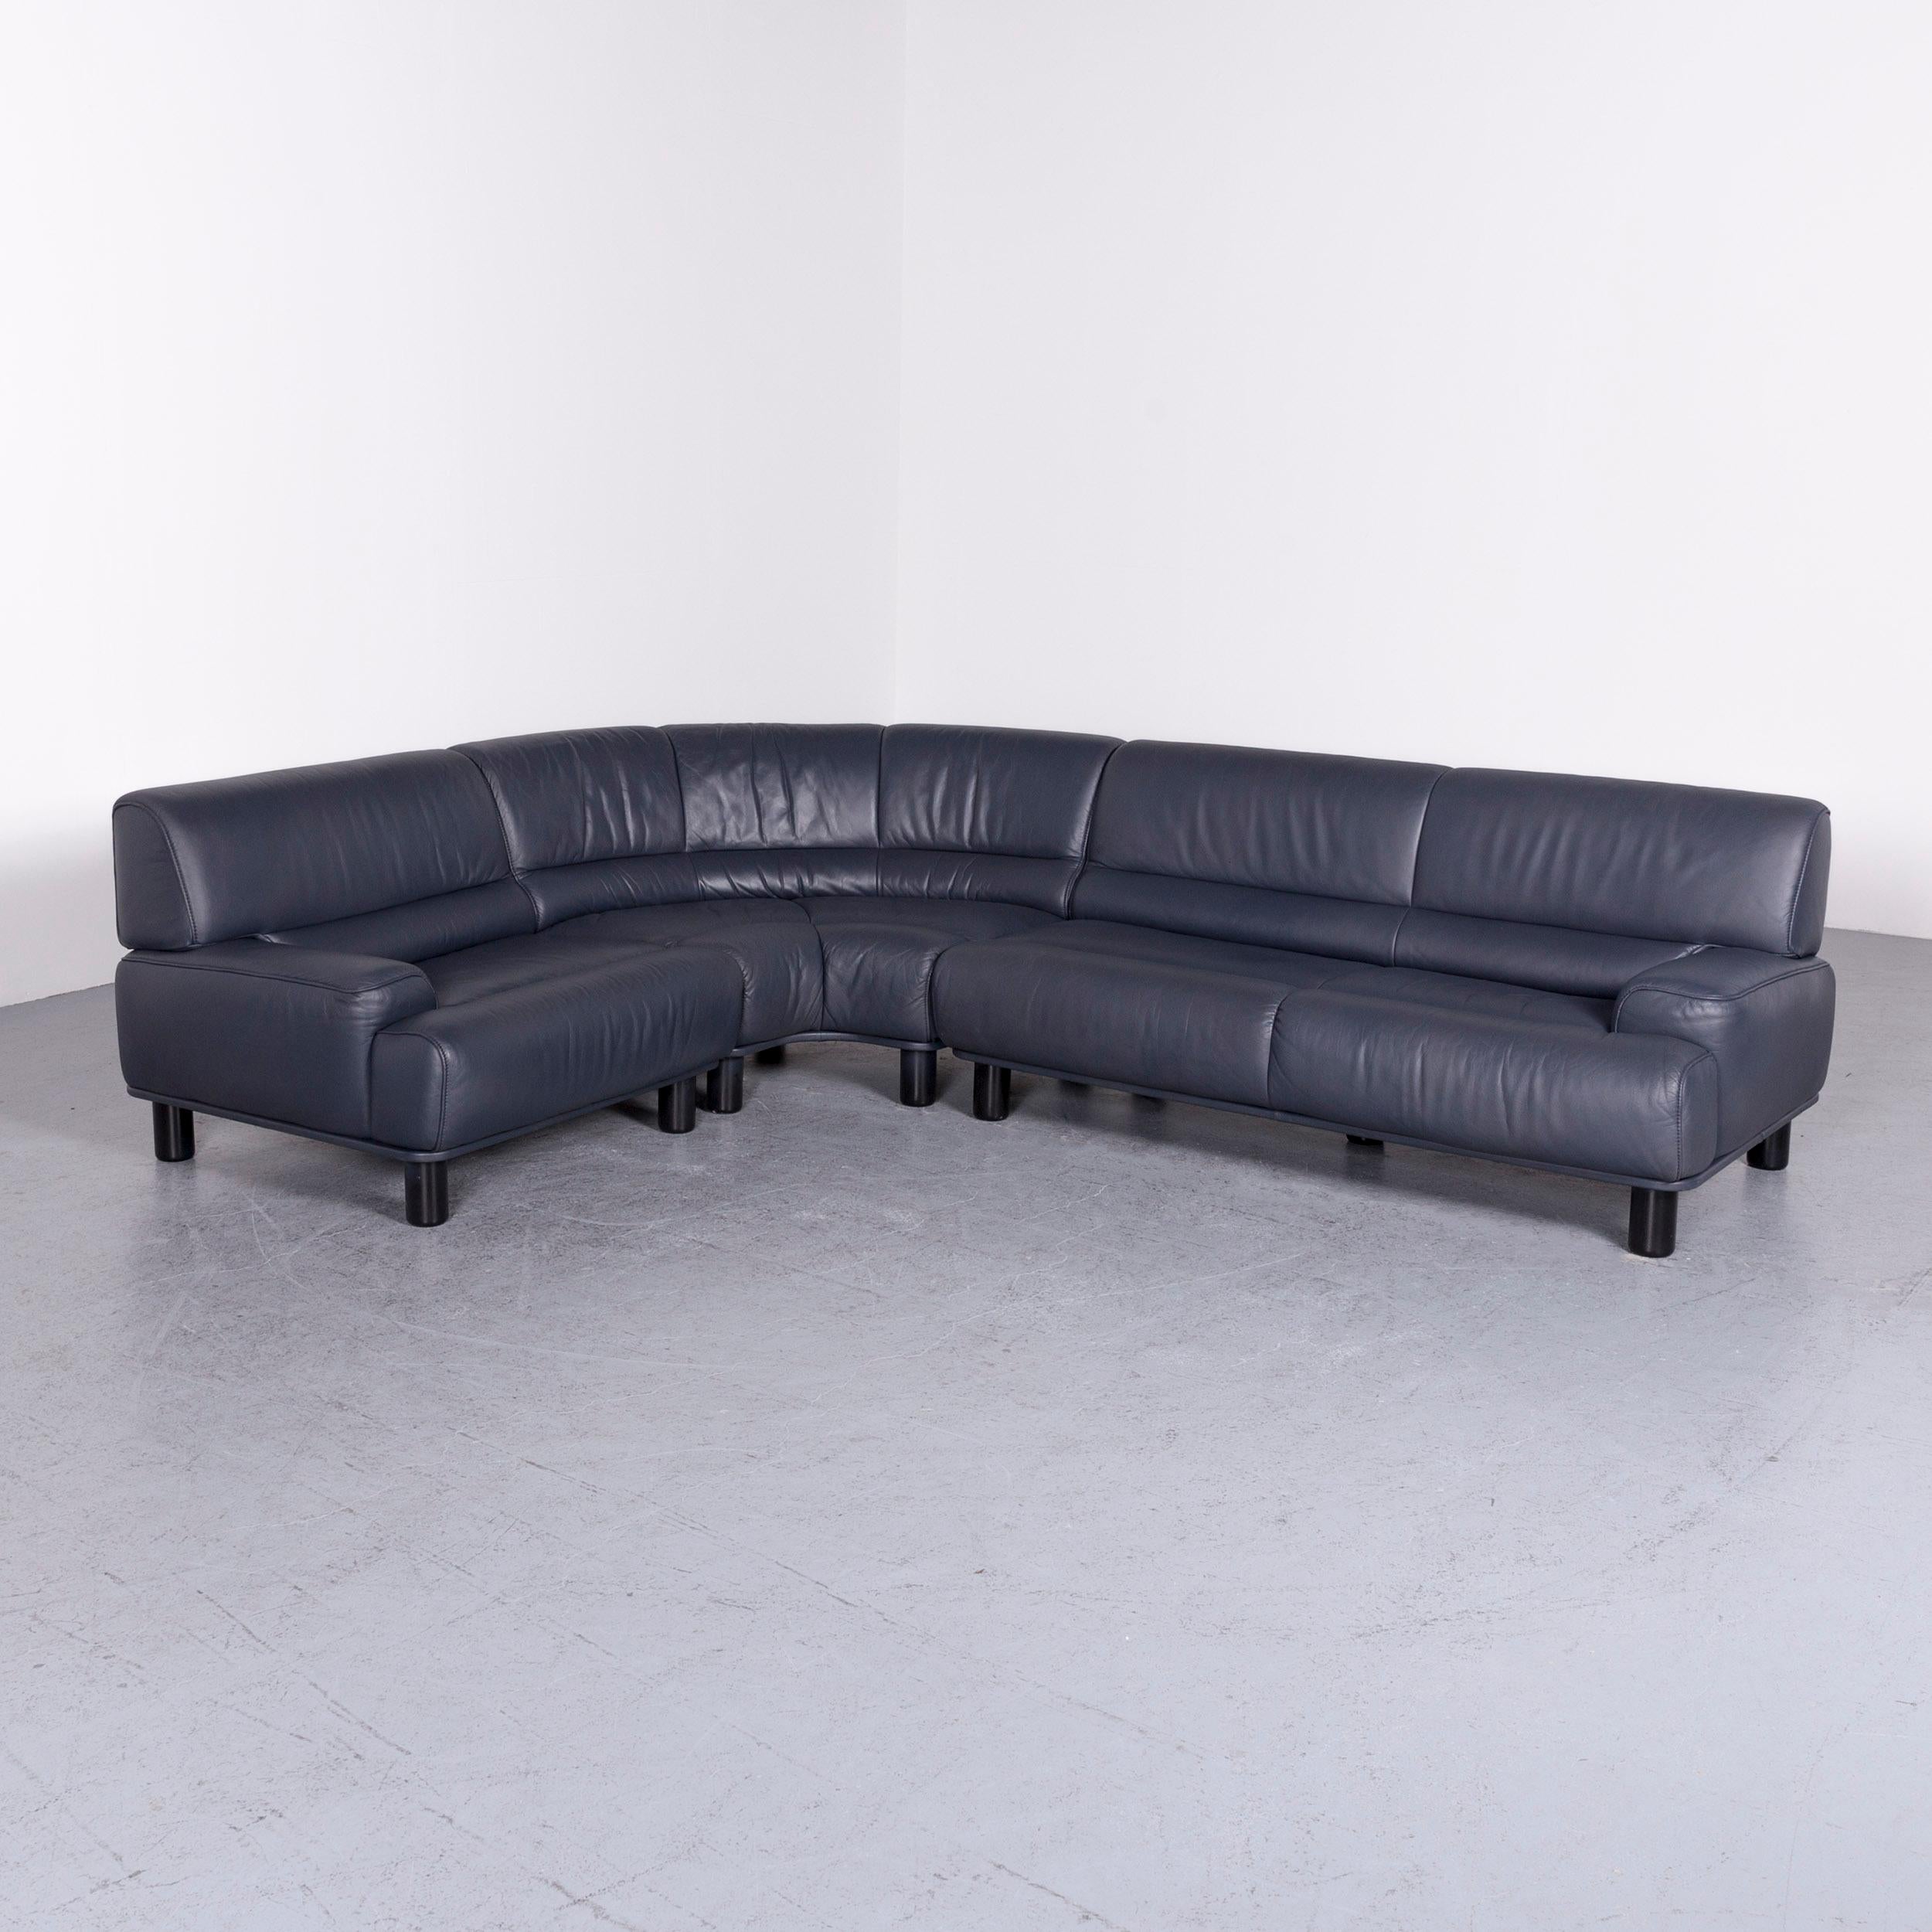 We bring to you a De Sede DS 18 designer leather corner couch sofa.